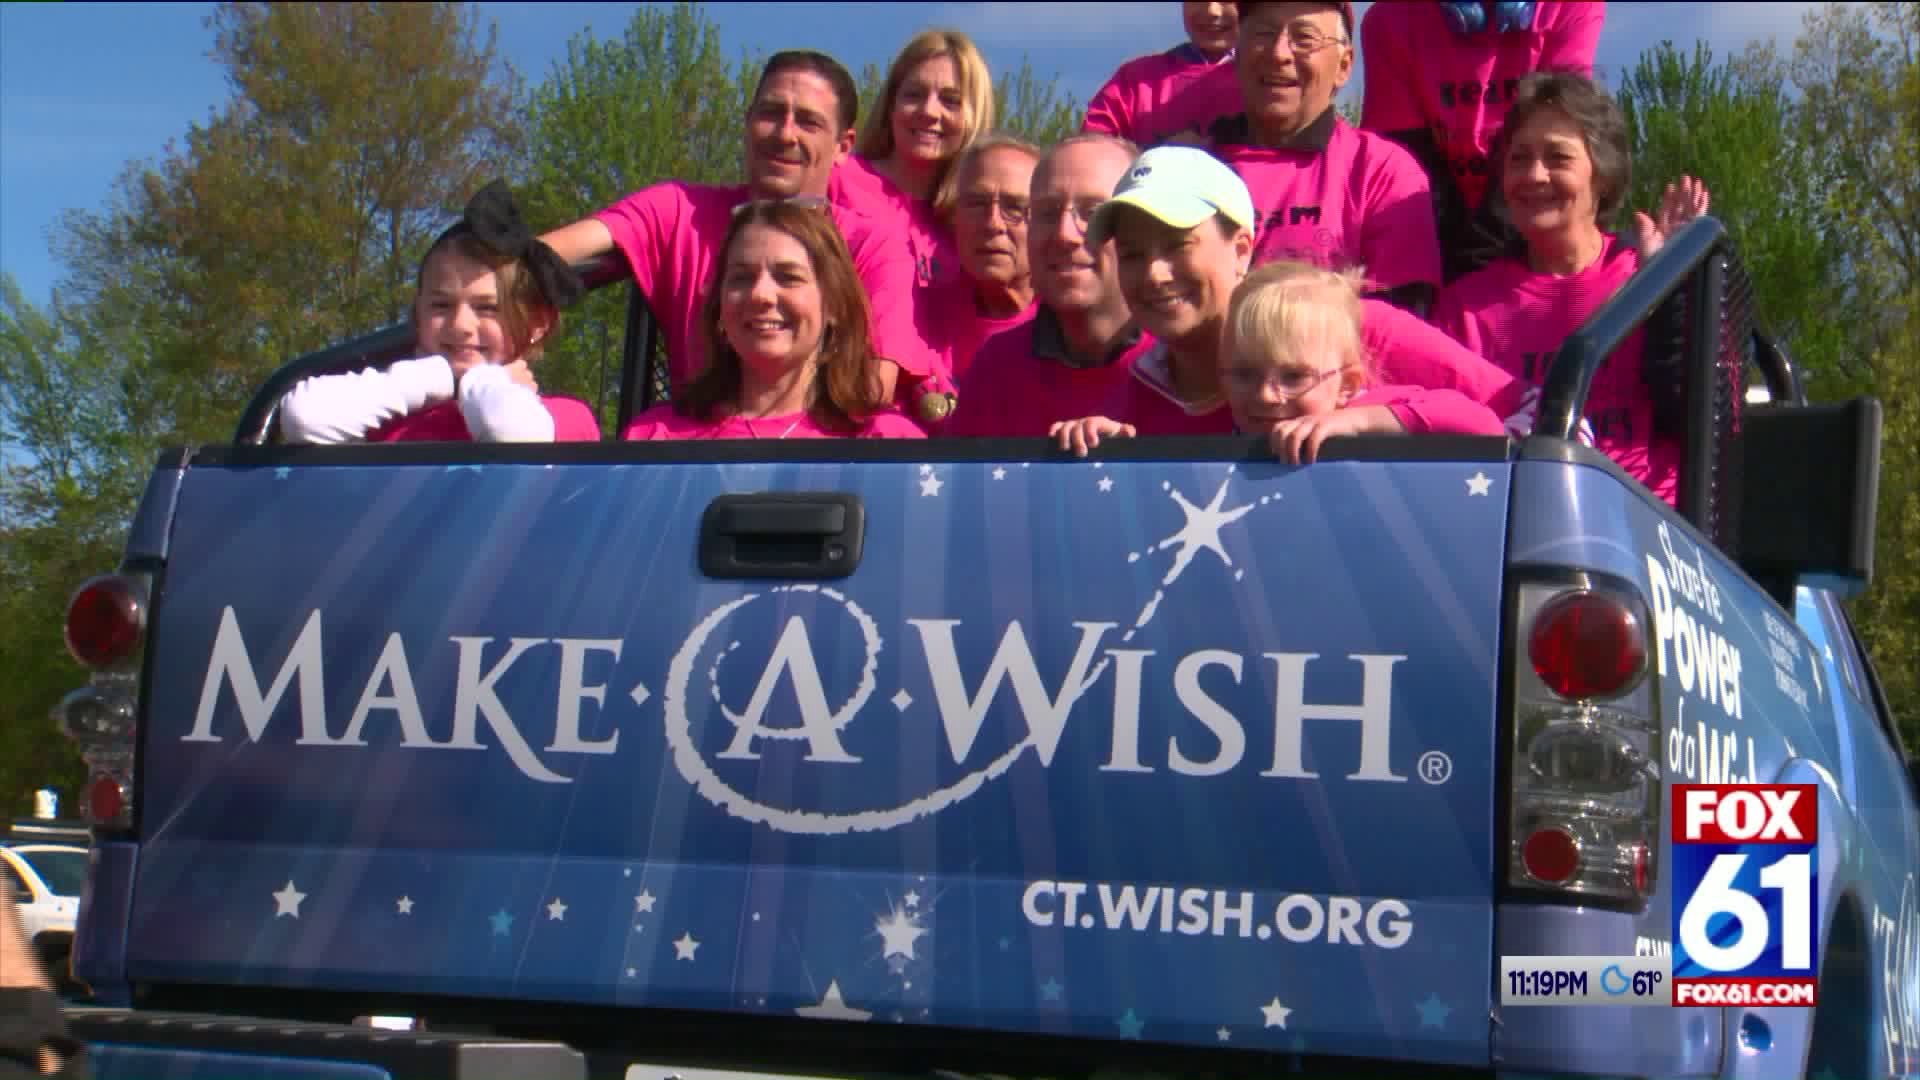 Walk-for-Wishes